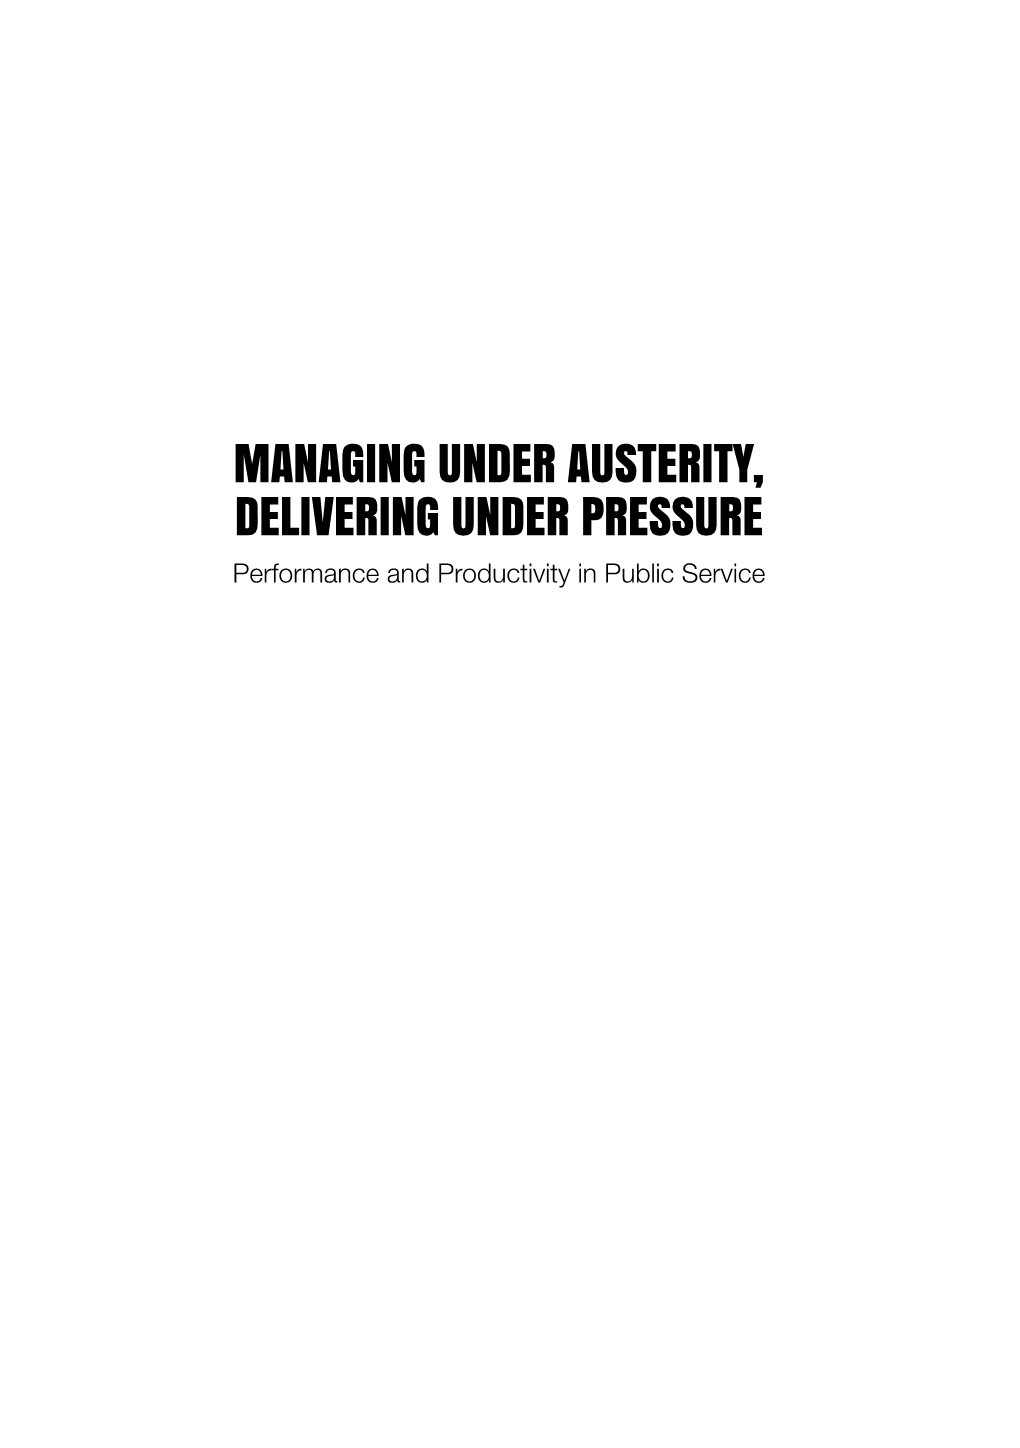 MANAGING UNDER AUSTERITY, DELIVERING UNDER PRESSURE Performance and Productivity in Public Service